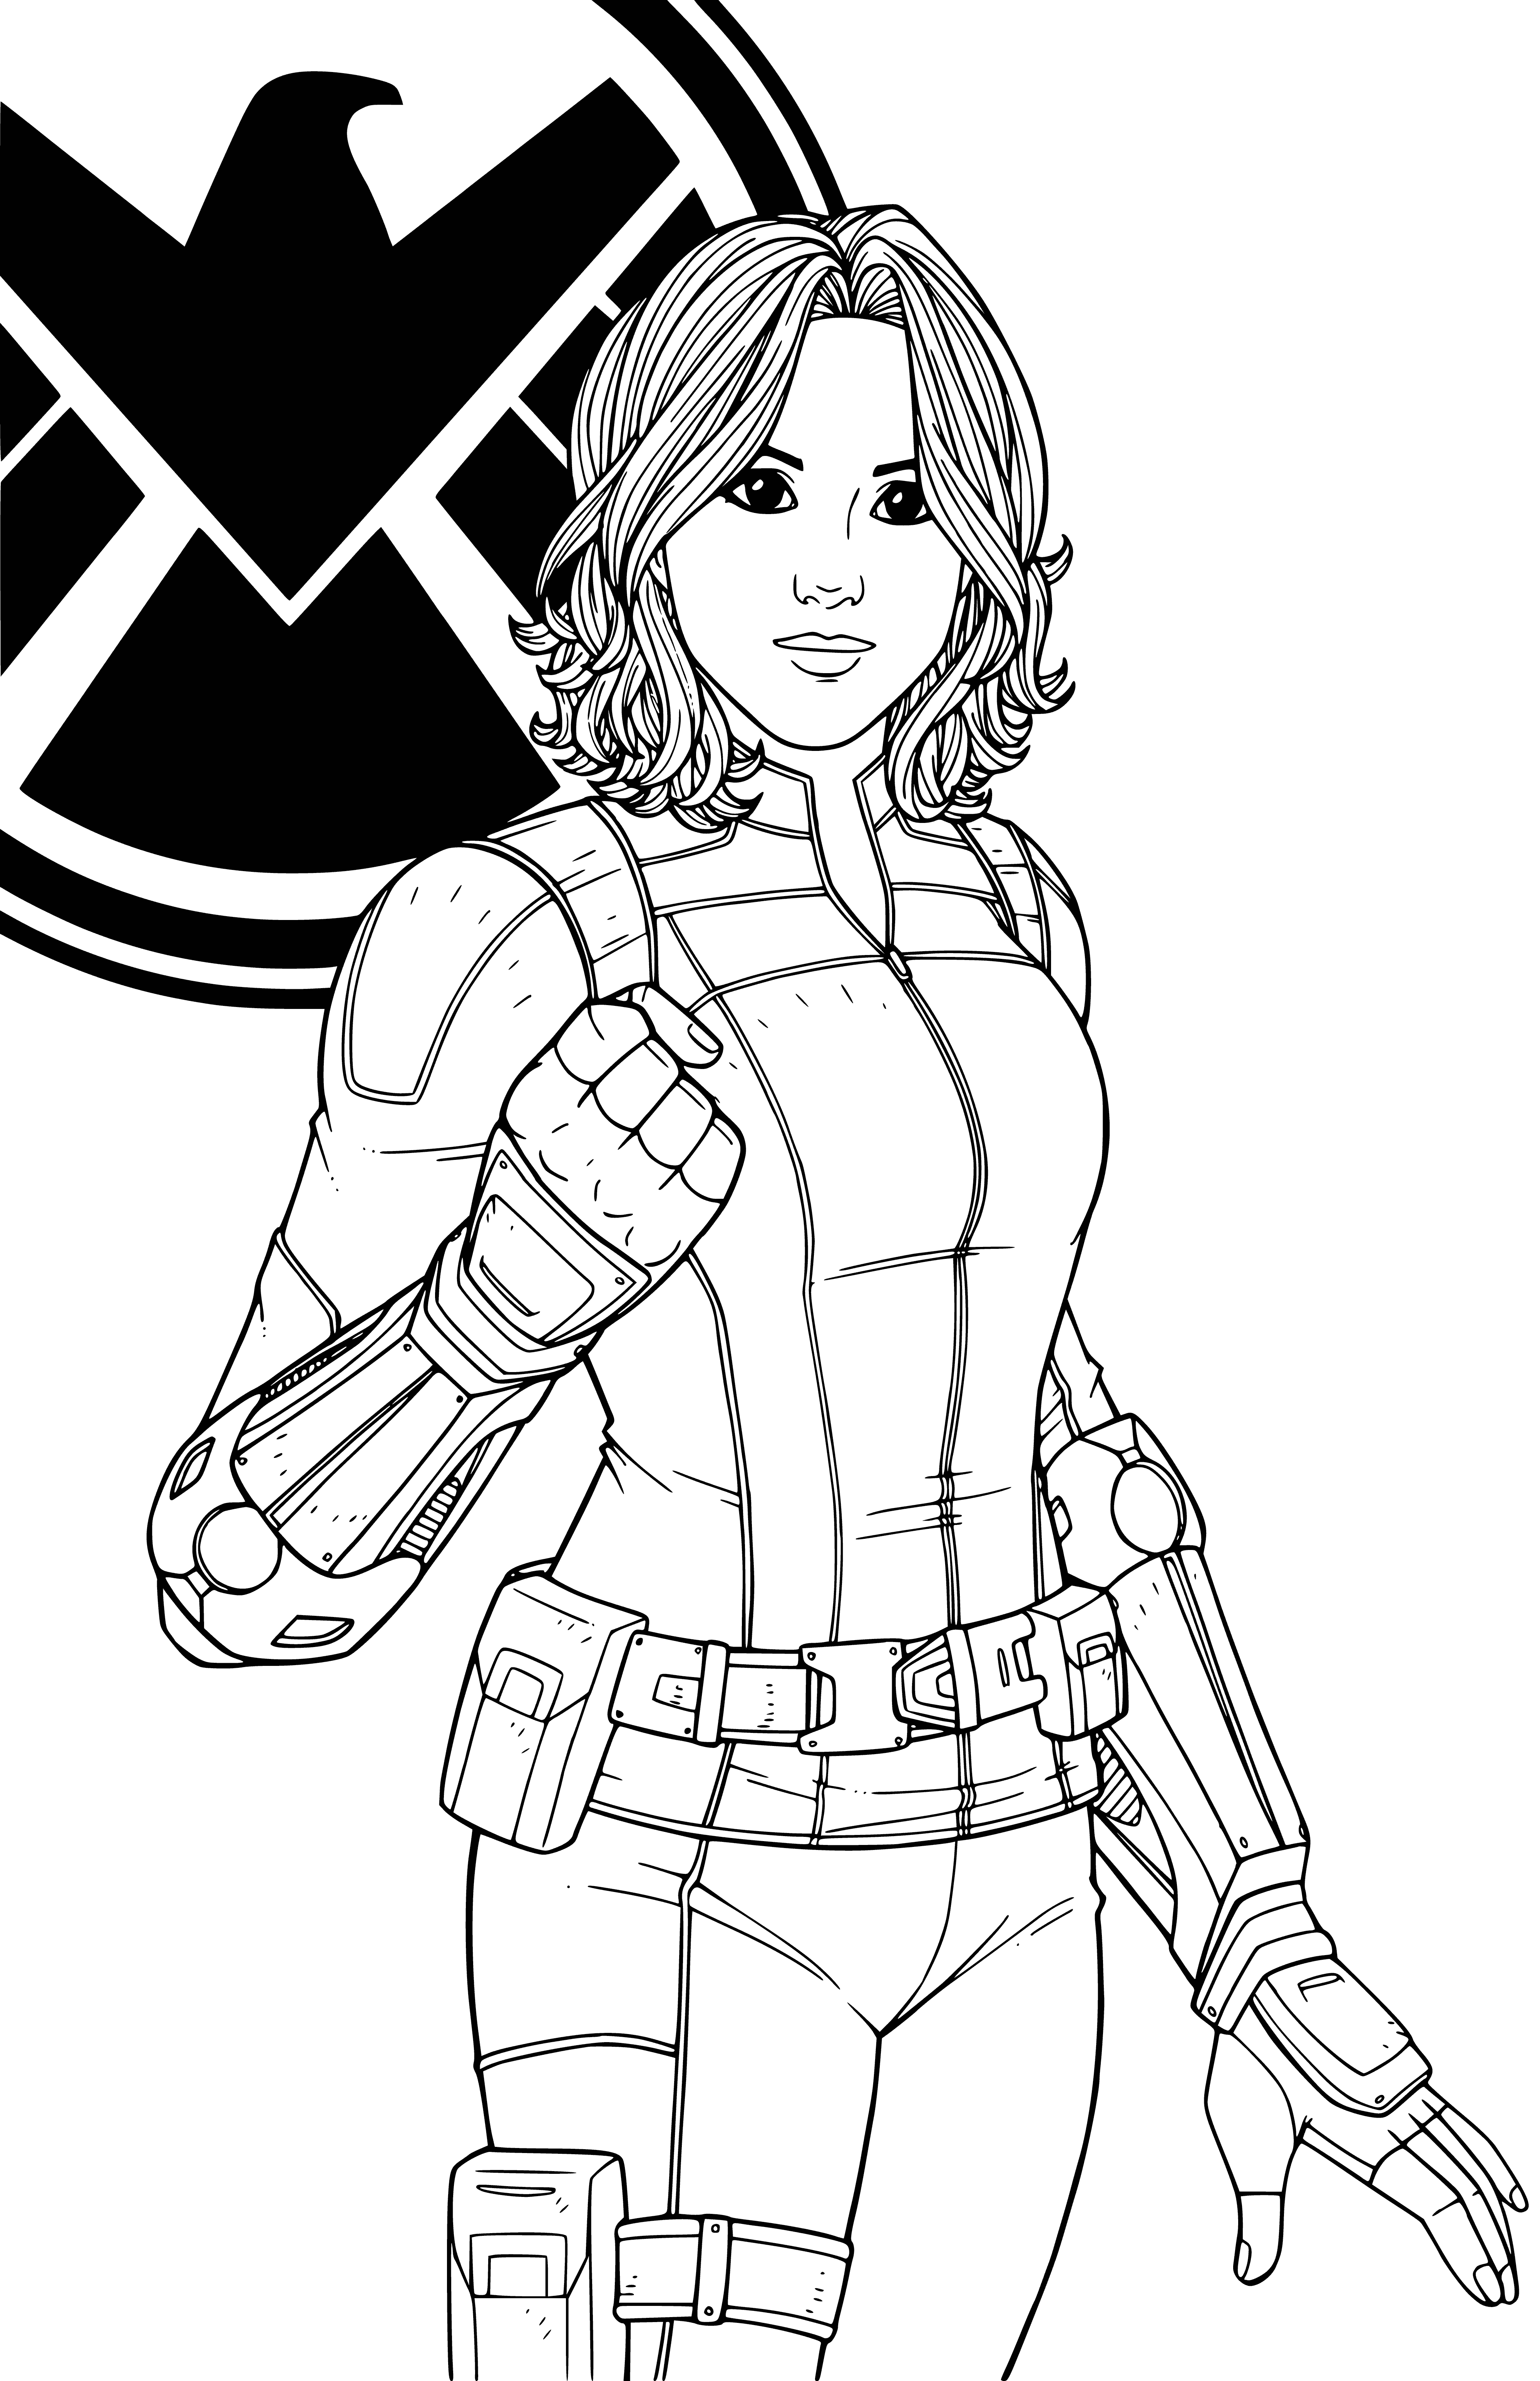 coloring page: Woman looking over her shoulder in a leather jacket, grey shirt with black Widow spider on it, and small device on left forearm.